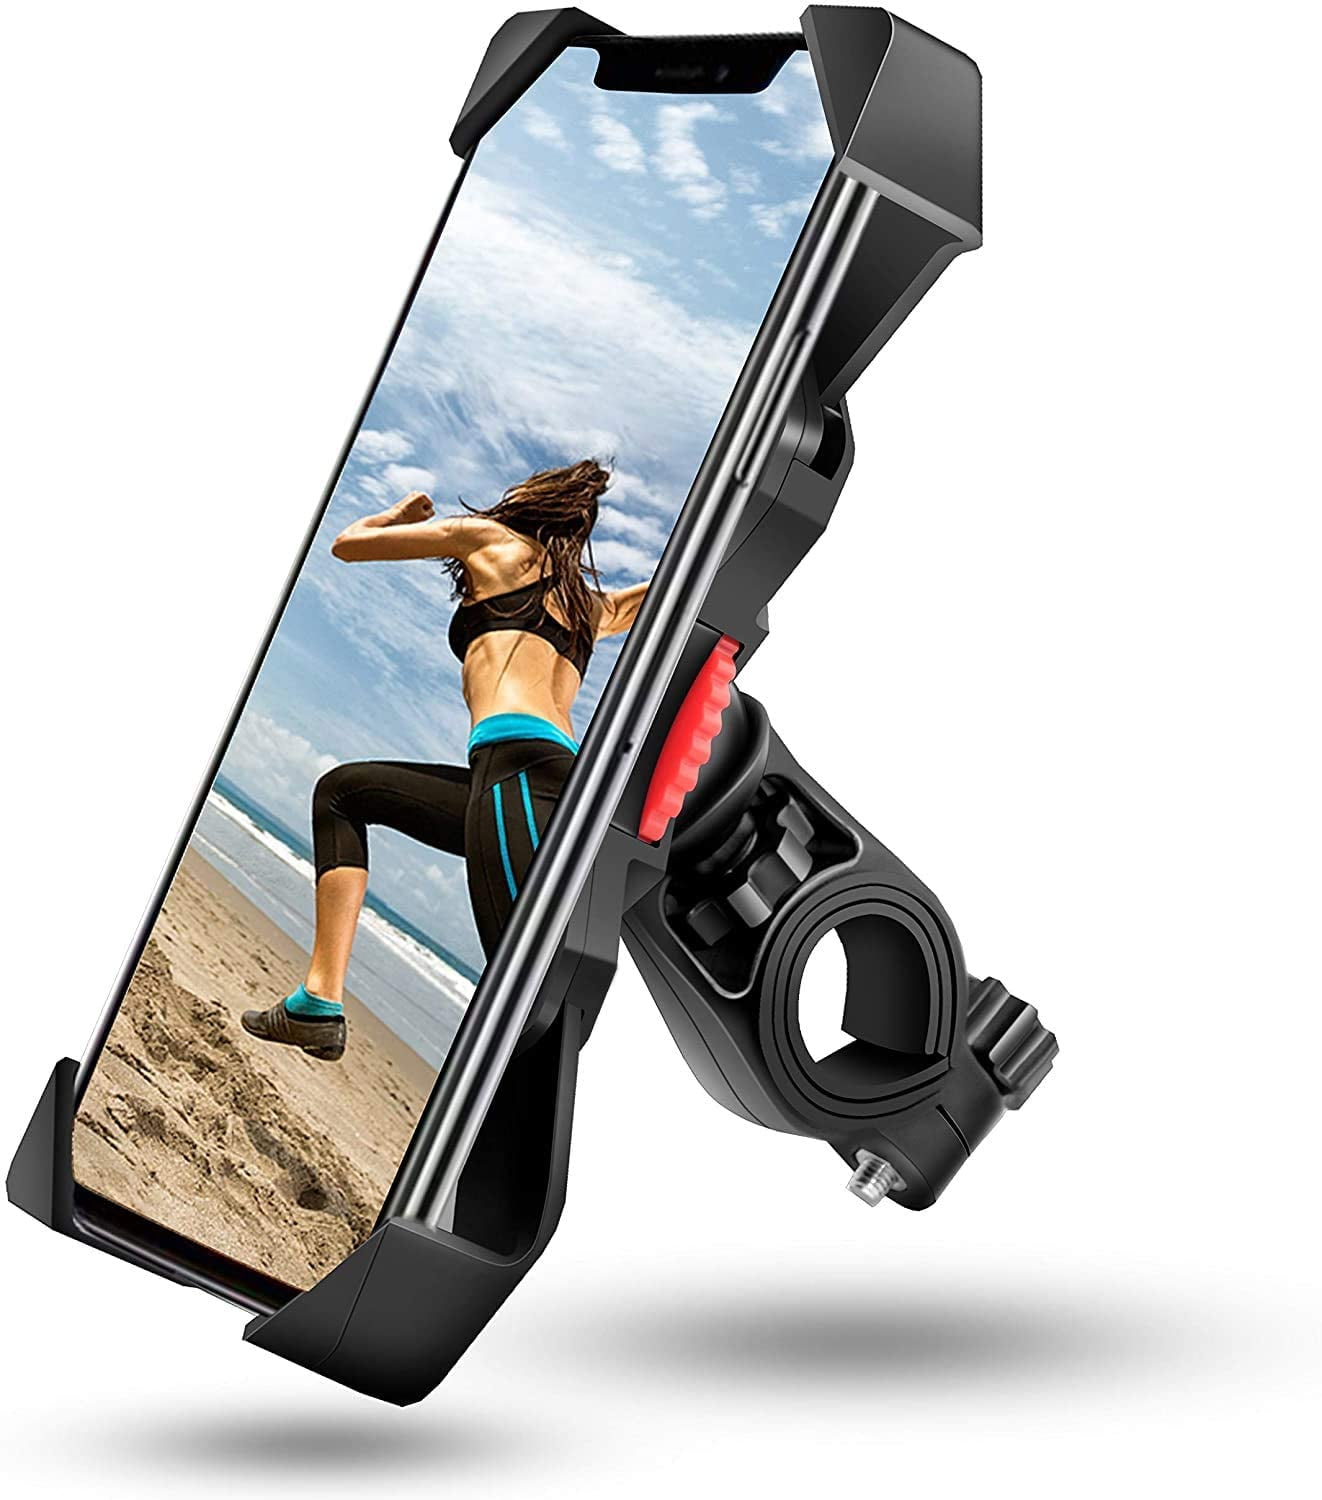 visnfa New Bike Phone Mount Anti Shake and Stable 360° Rotation Bike Accessories for Any Smartphone GPS Other Devices Between 3.5 and 6.5 inches